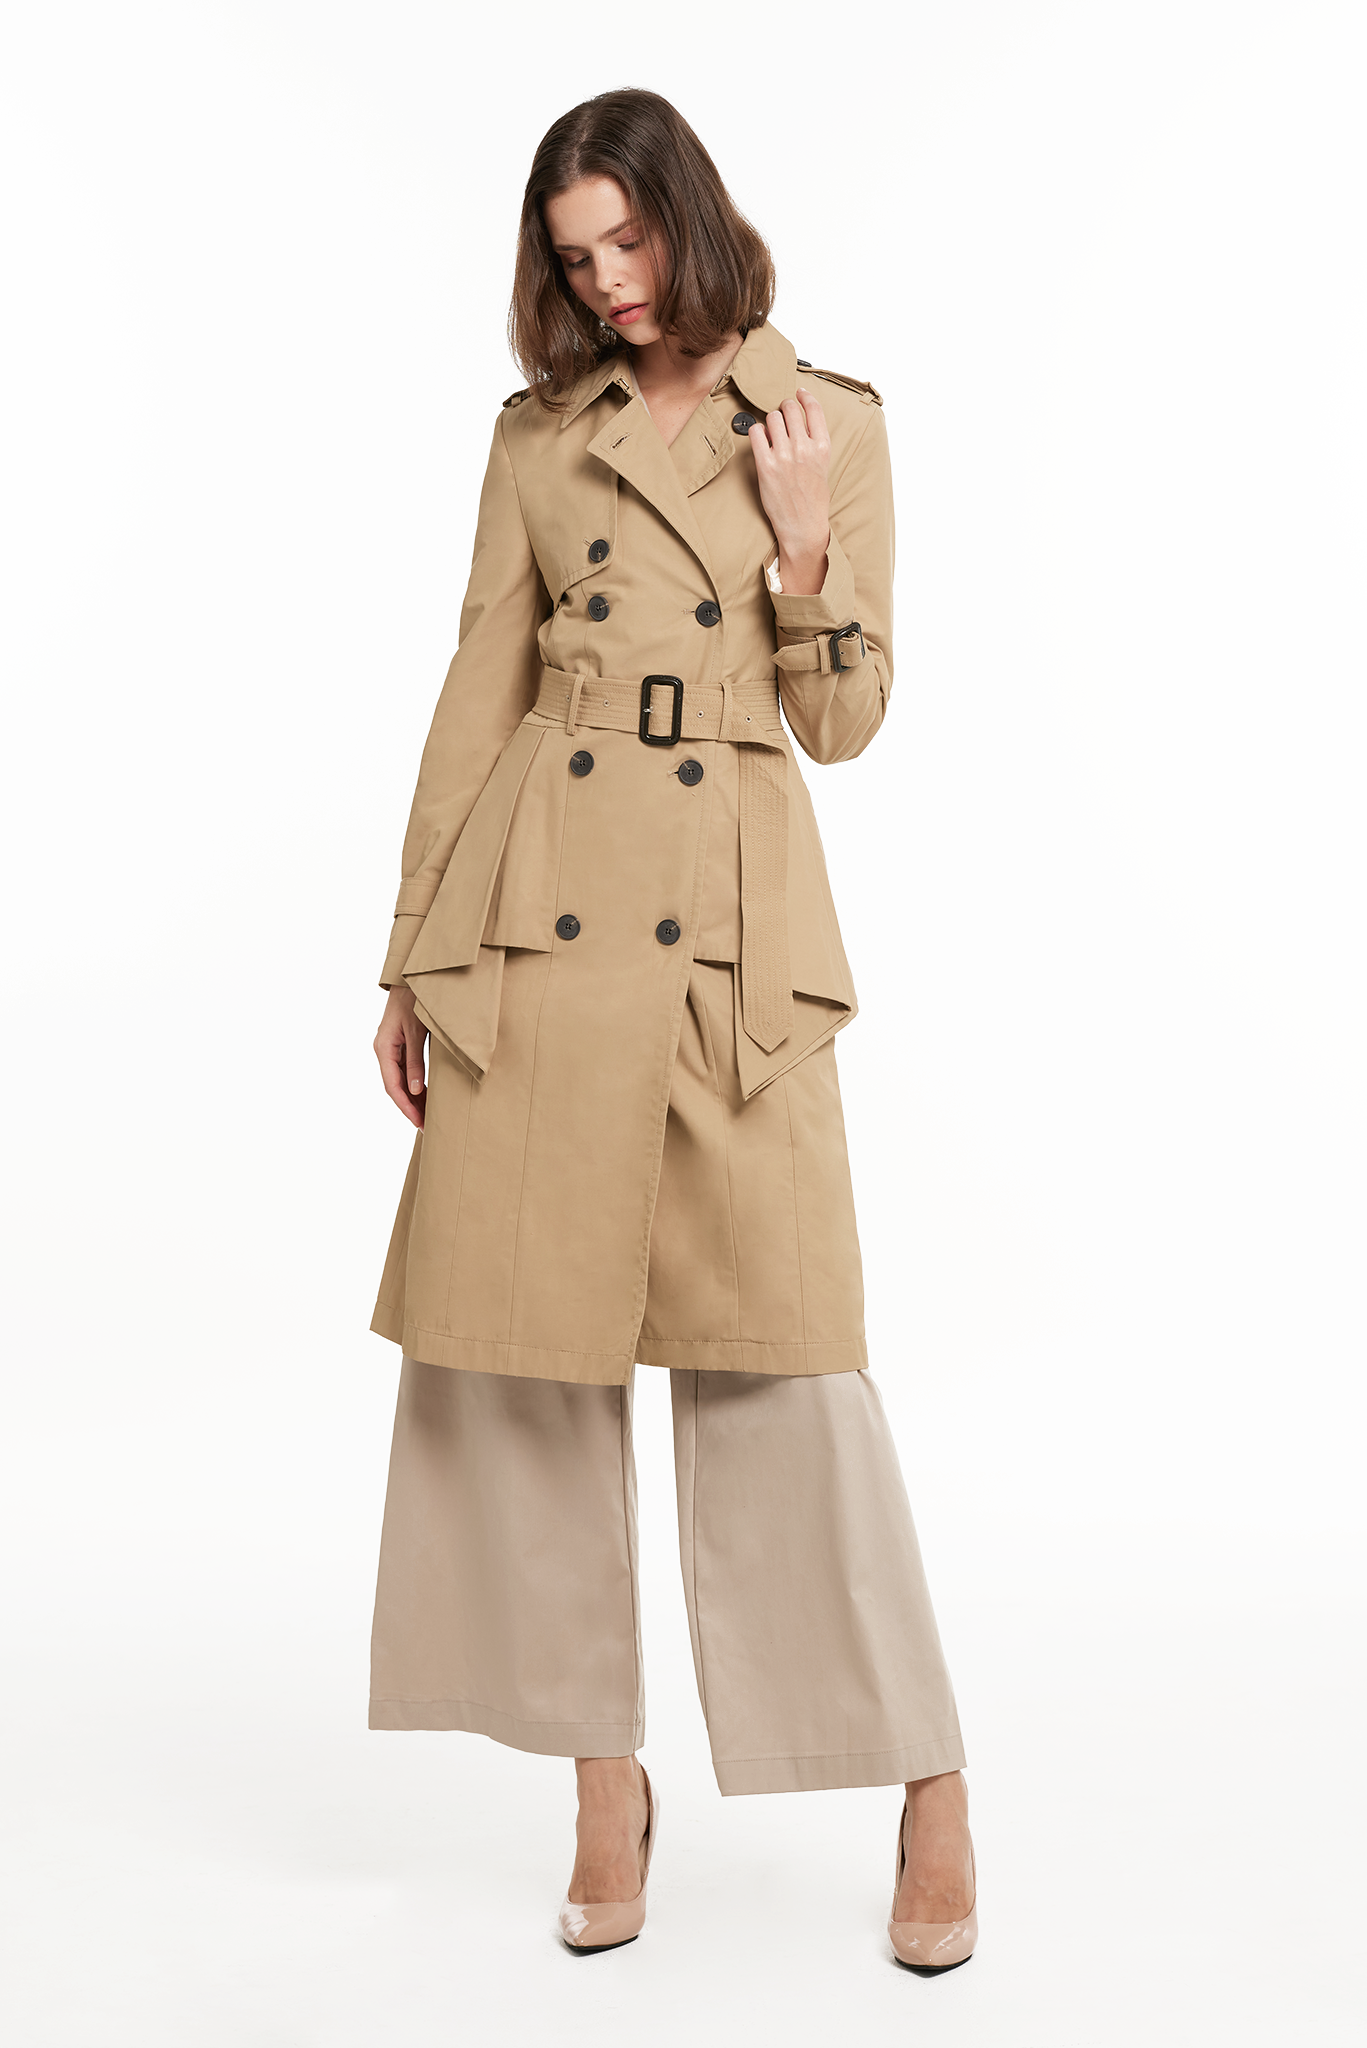 AVELYN Flare Back Trench Coat (Brown)